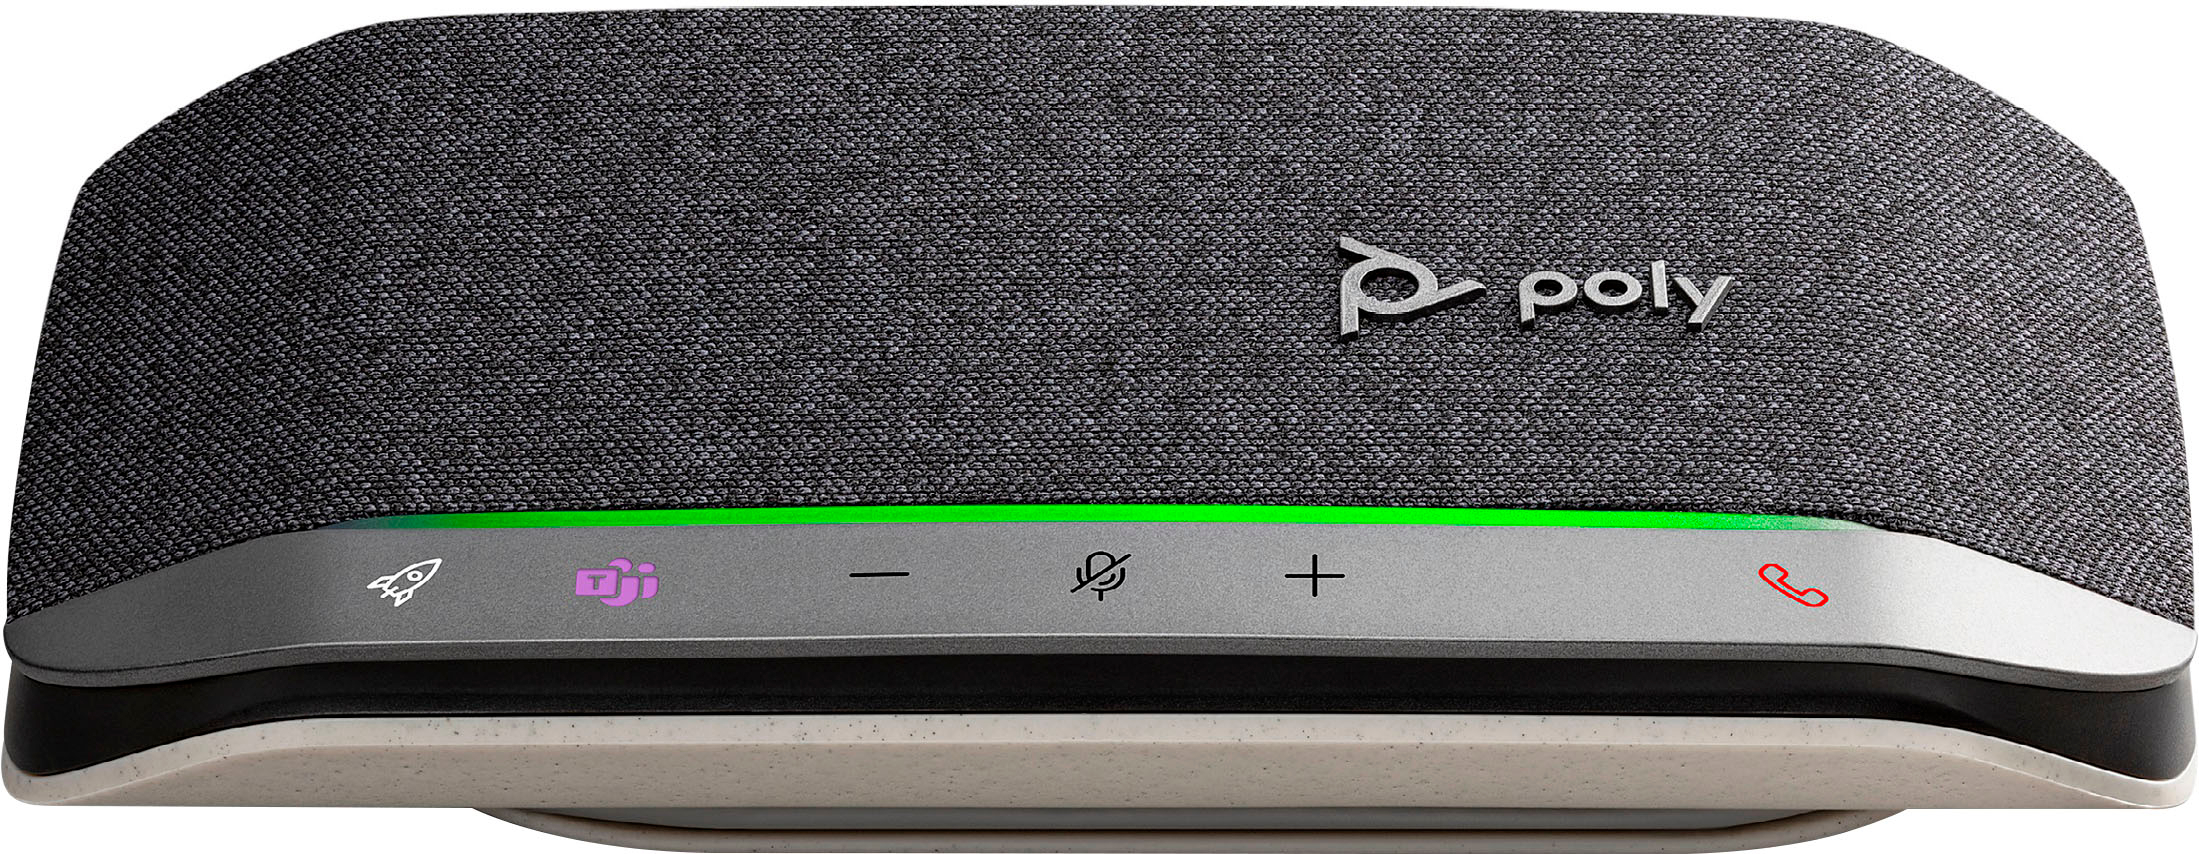 Angle View: Poly - formerly Plantronics - Sync 20 Personal USB/Bluetooth Smart Speakerphone with Noise and Echo Reduction